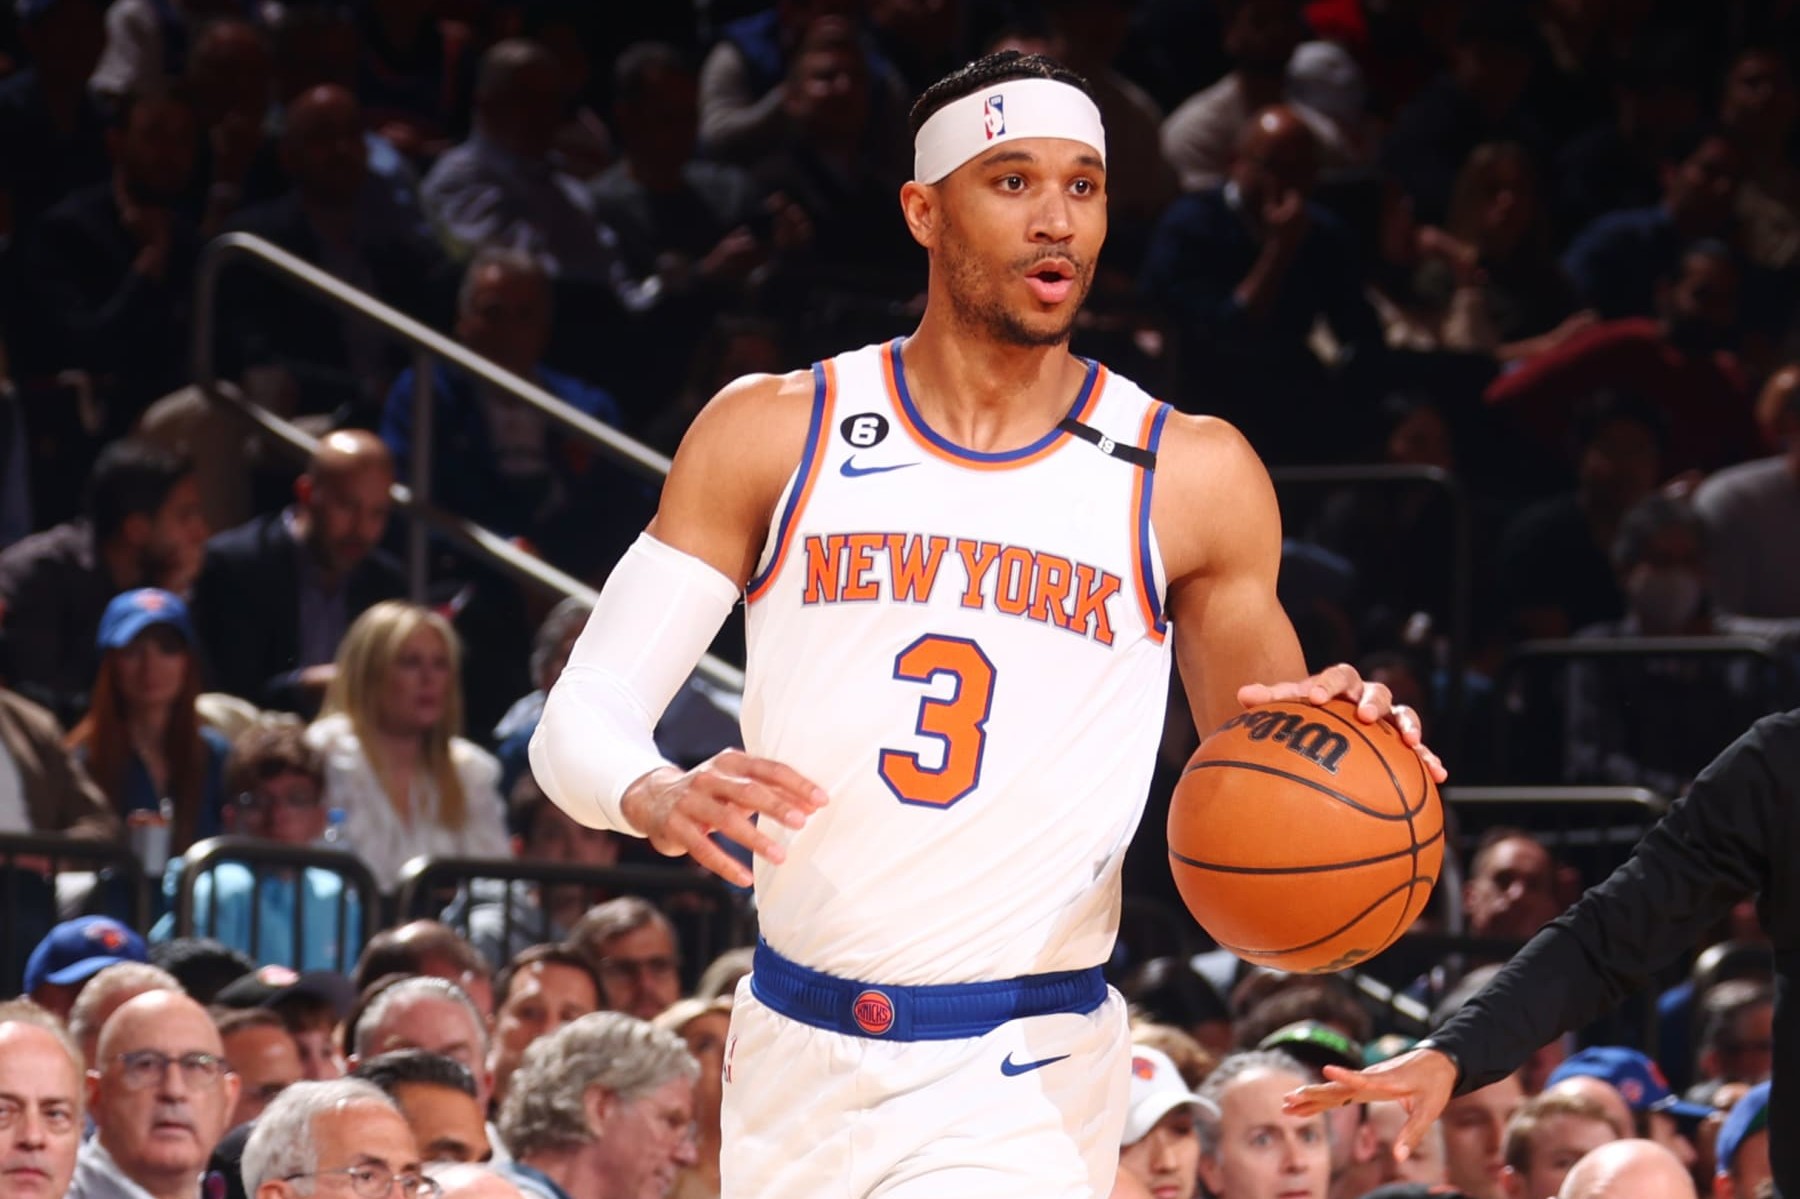 CBS gives Knicks rare glowing review for off-season moves